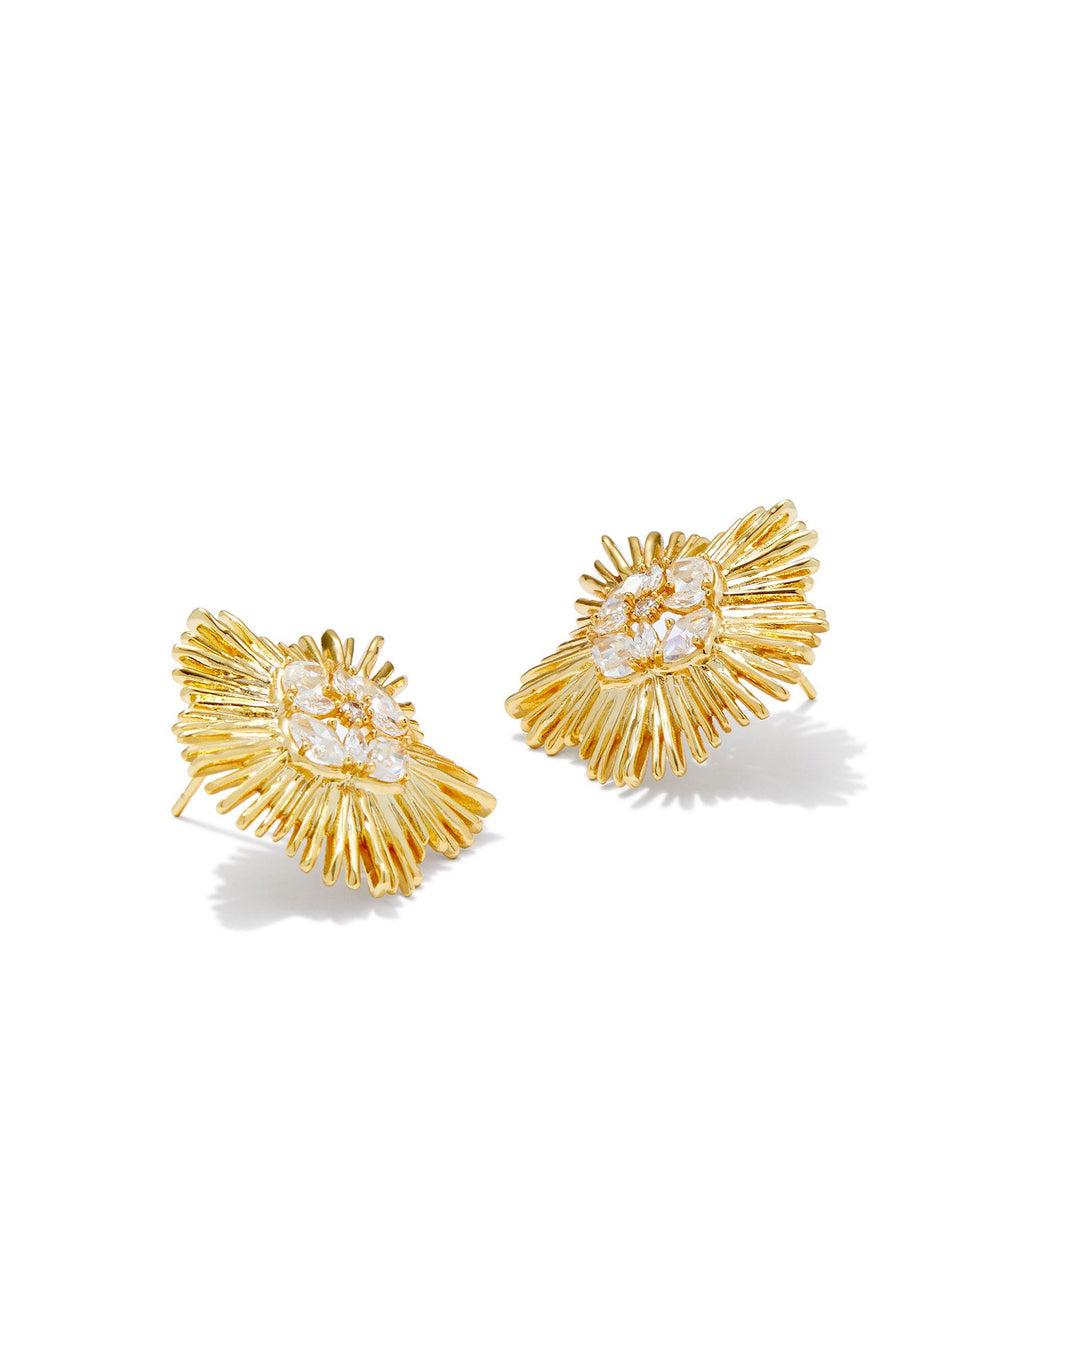 Dira Crystal Statement Stud in Whtie Crystal Gold